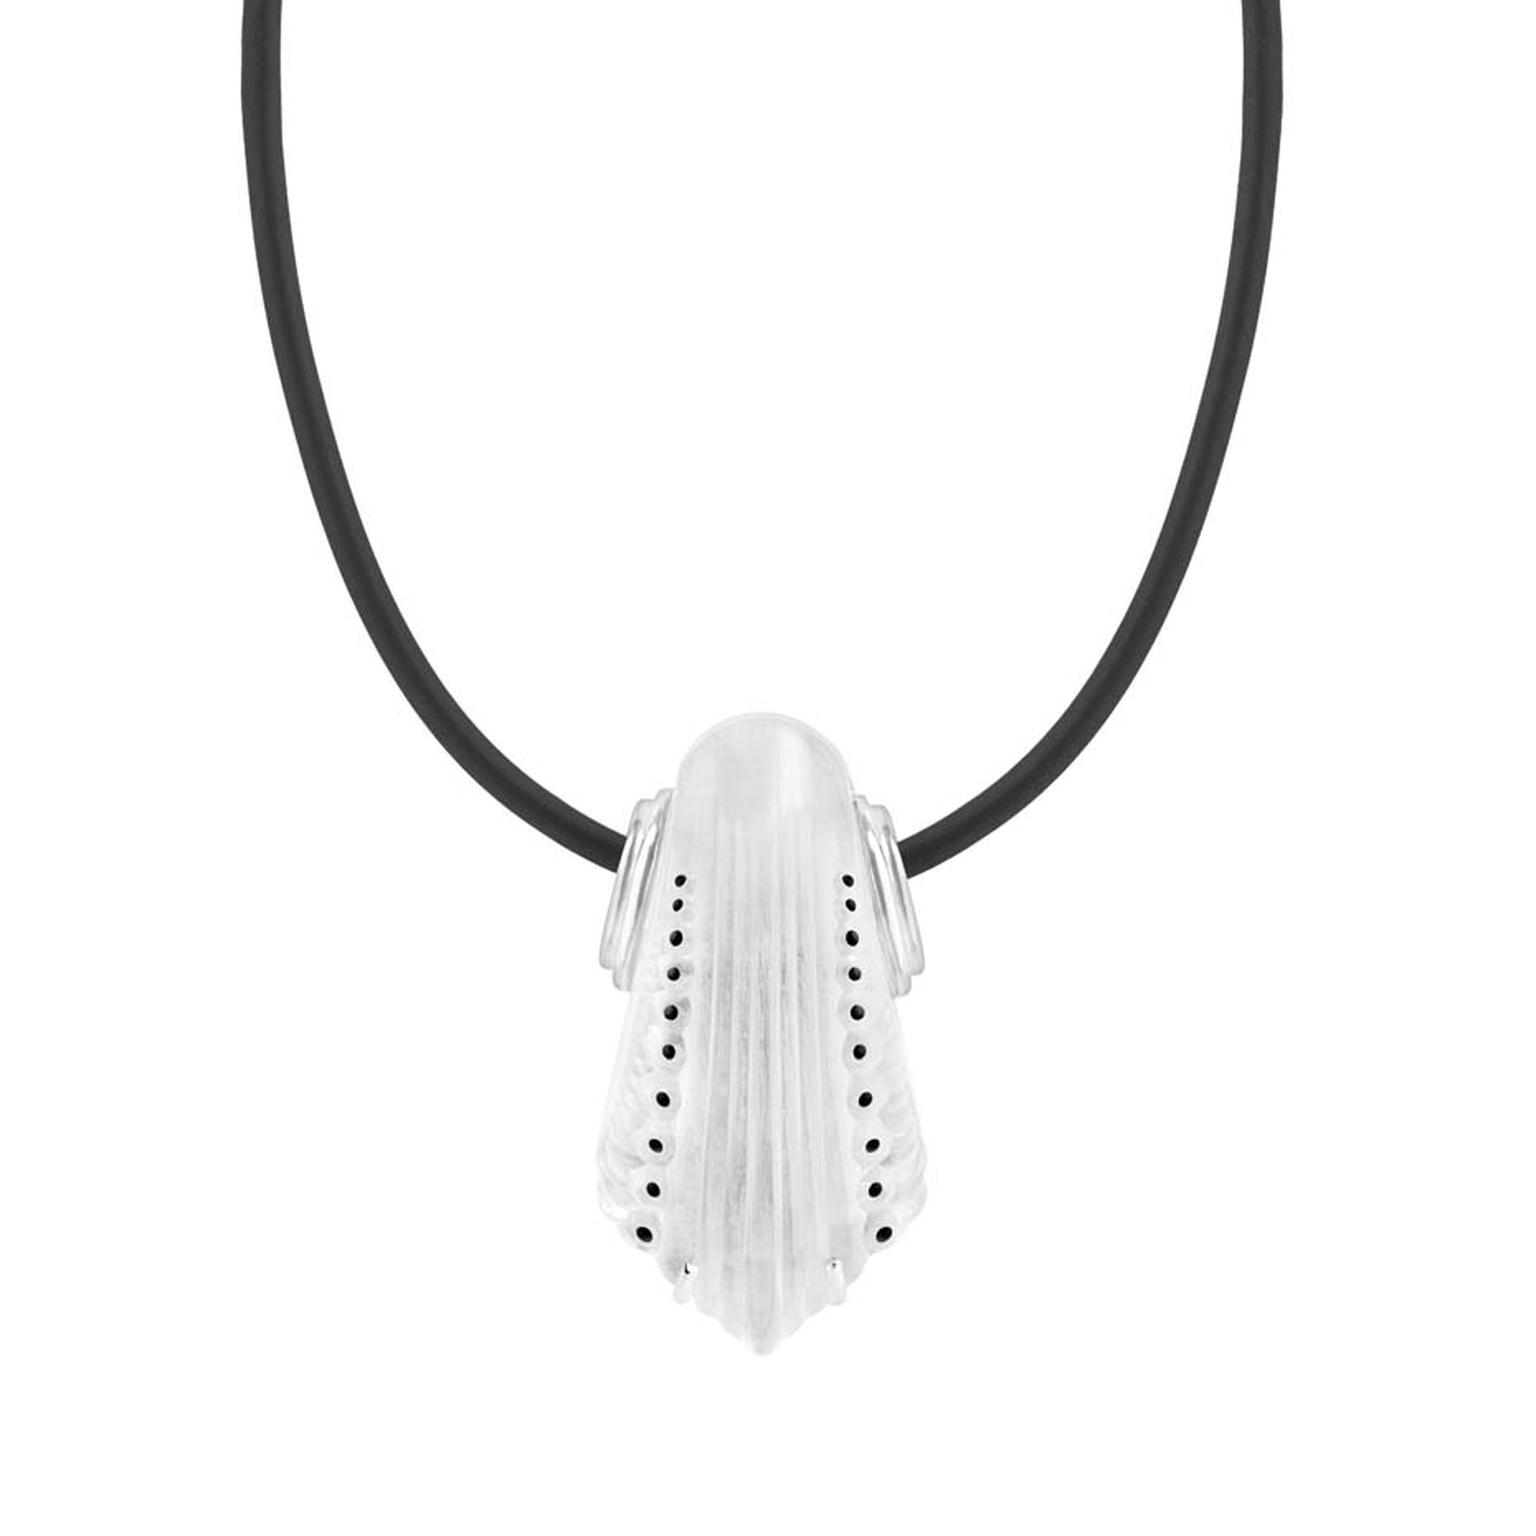 Lalique Icone collection silver pendant featuring clear Lalique crystal enamelled in black